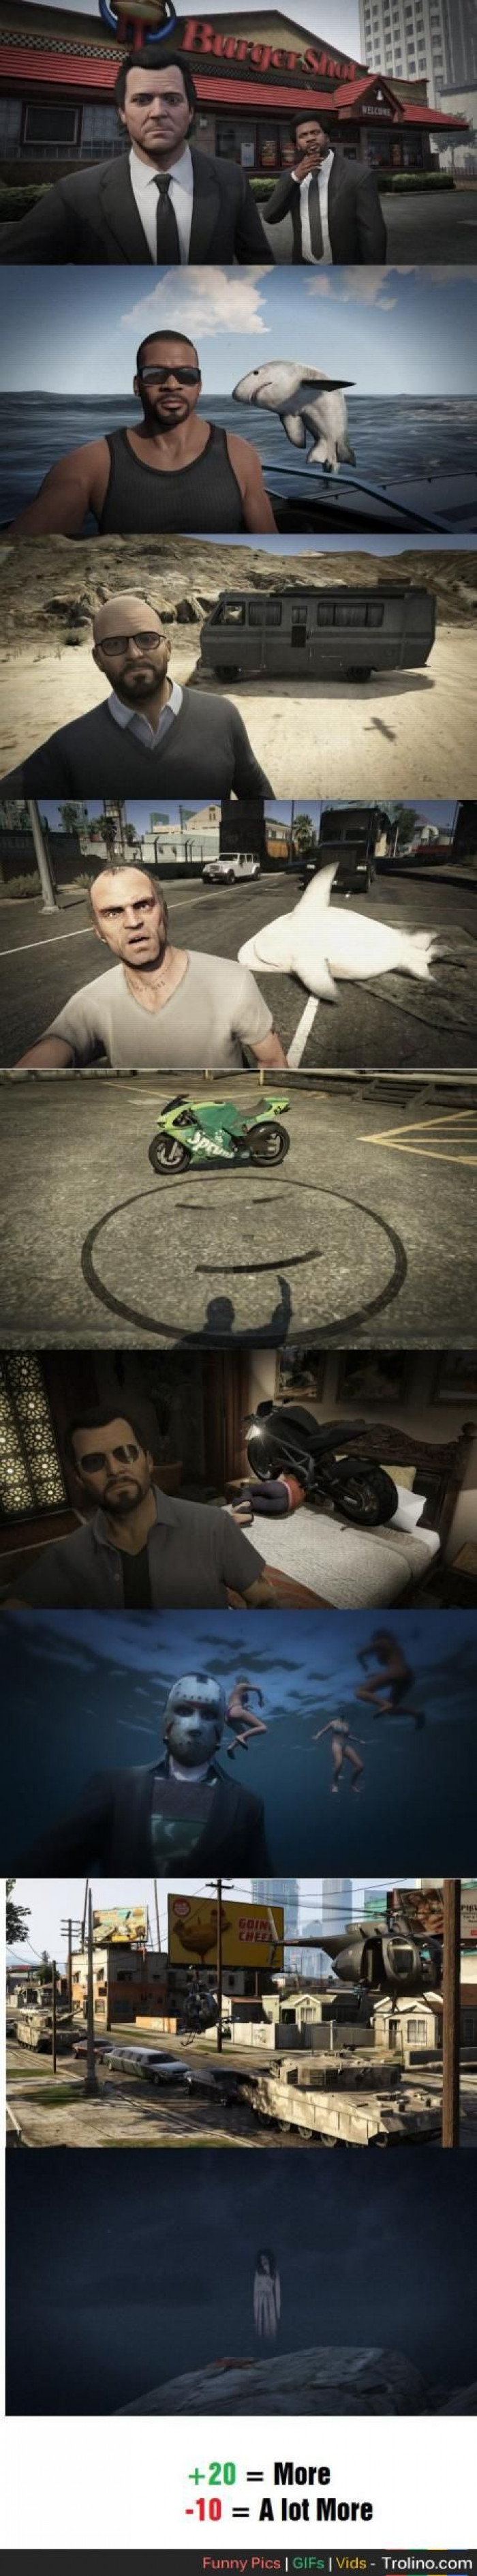 10 GTA V Selfies That Show How Fun The Game Can Be